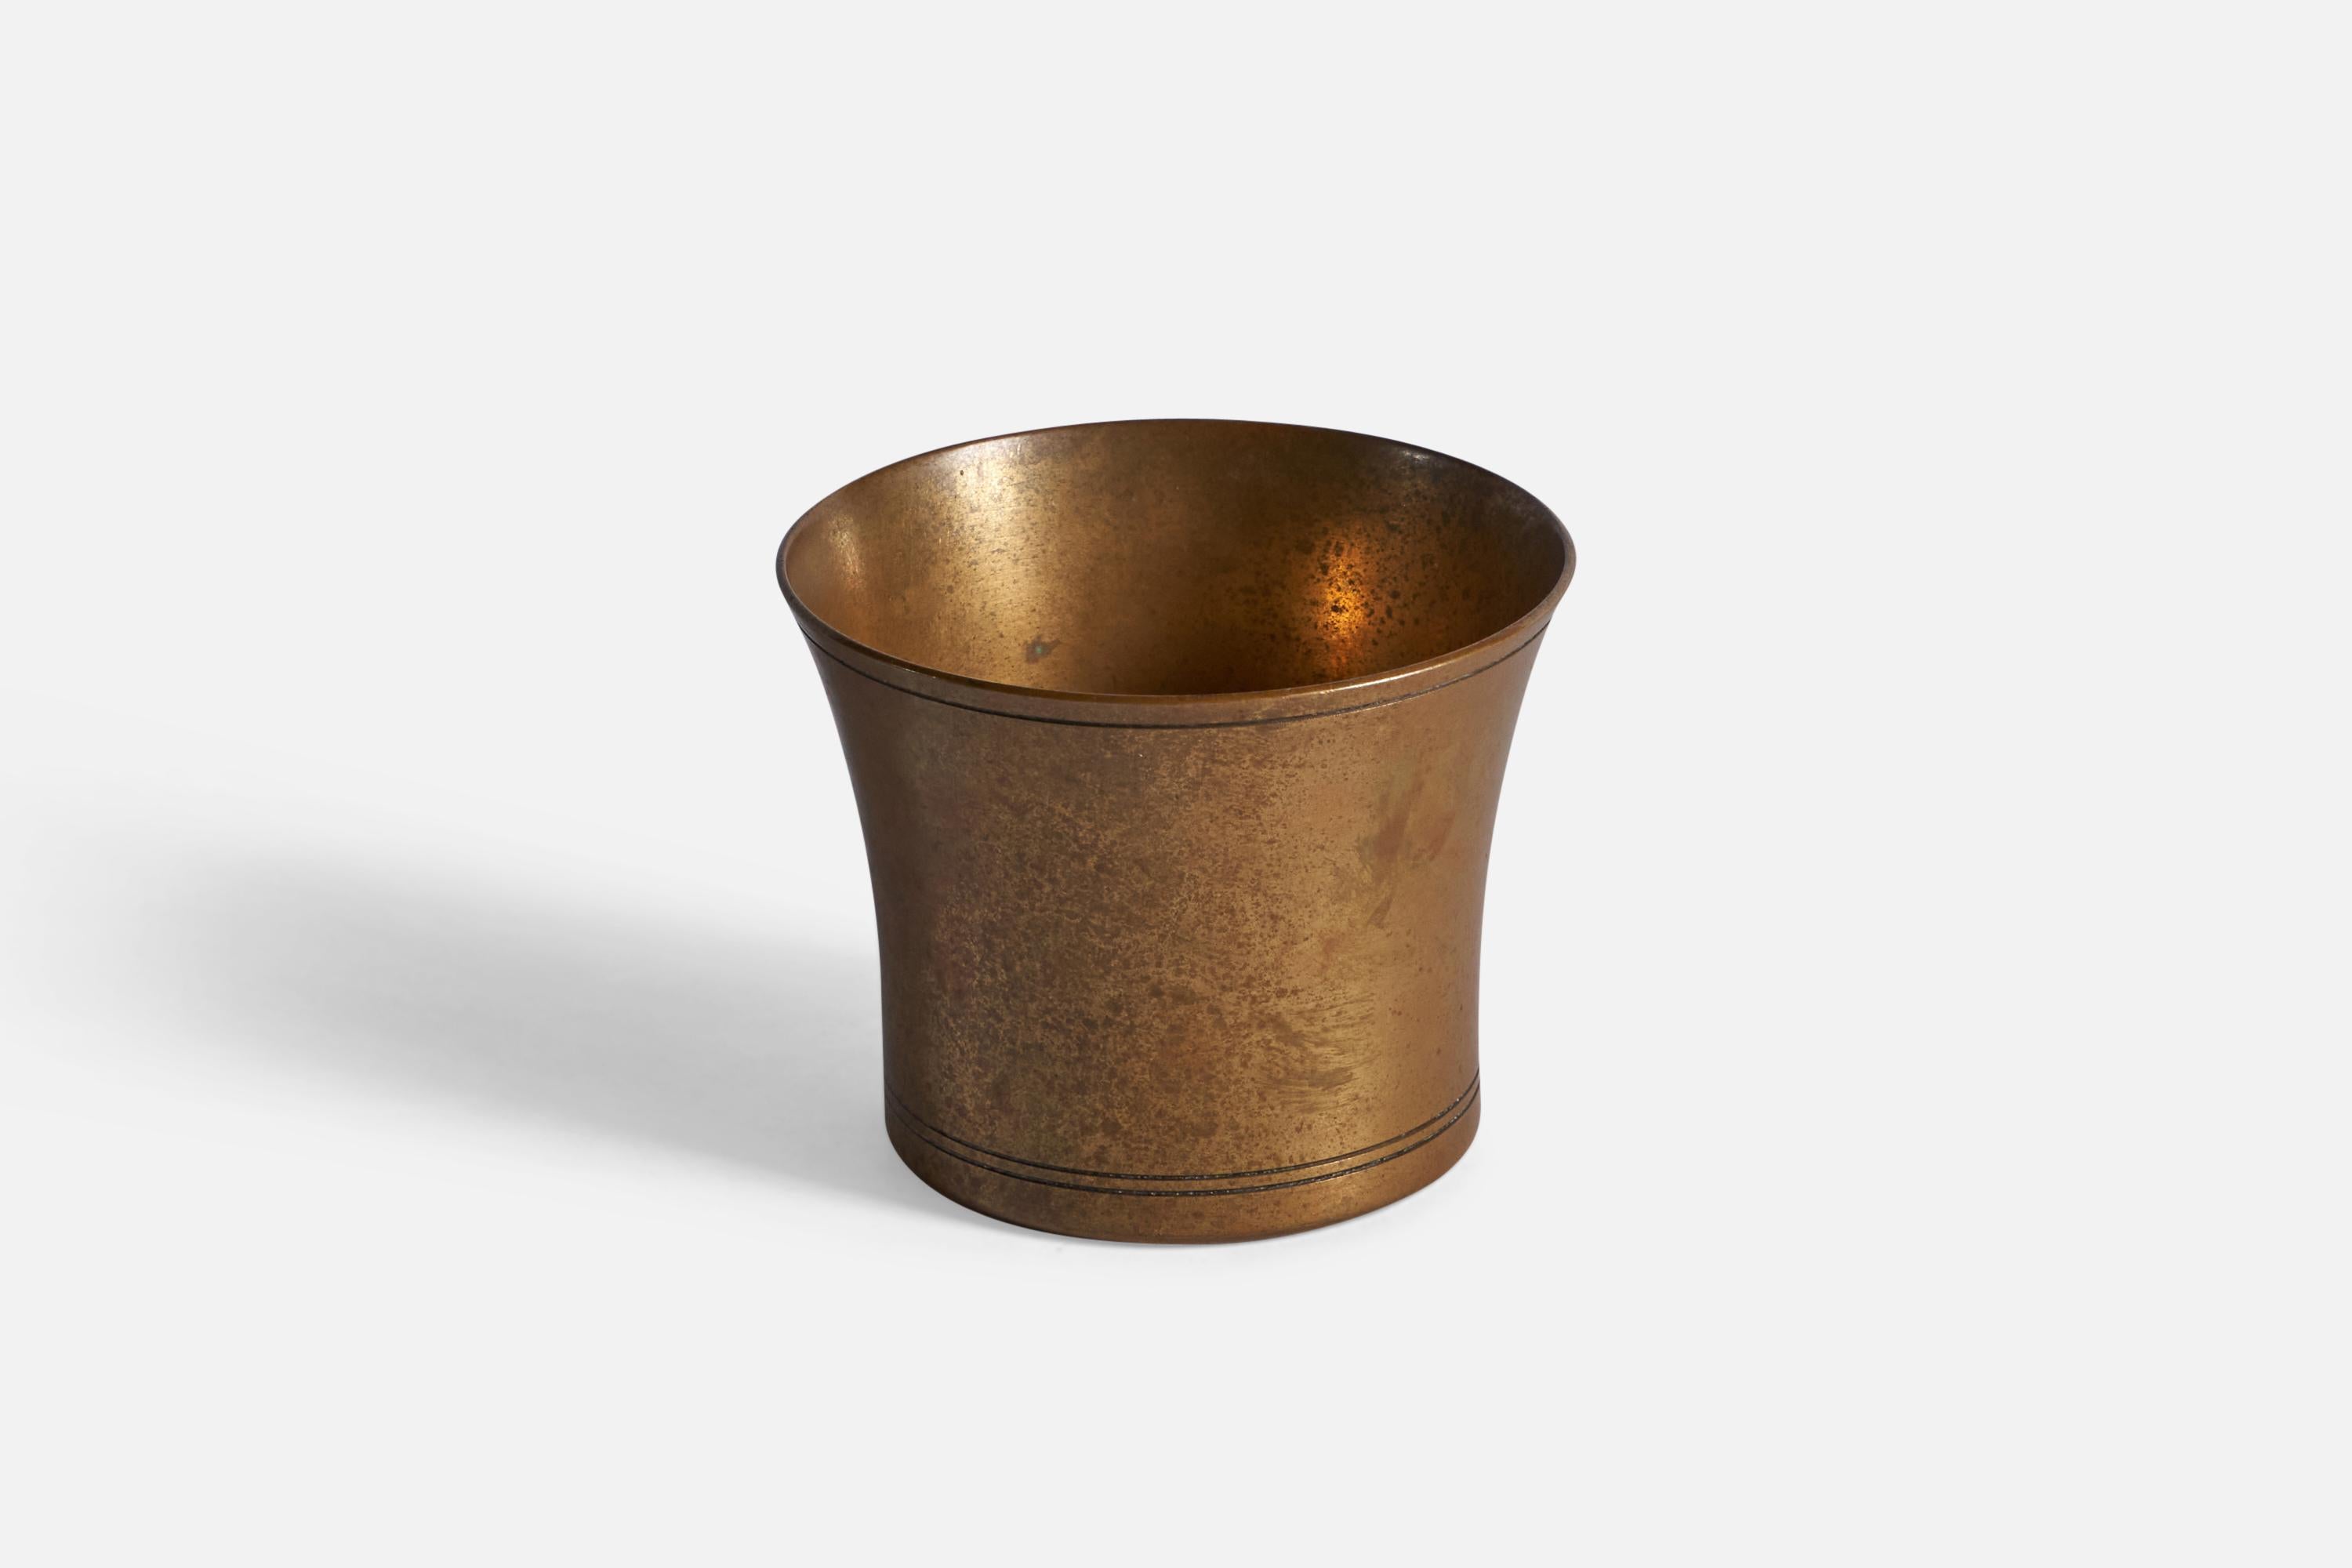 A small bronze vase designed and produced by Just Andersen, Denmark, 1930s.